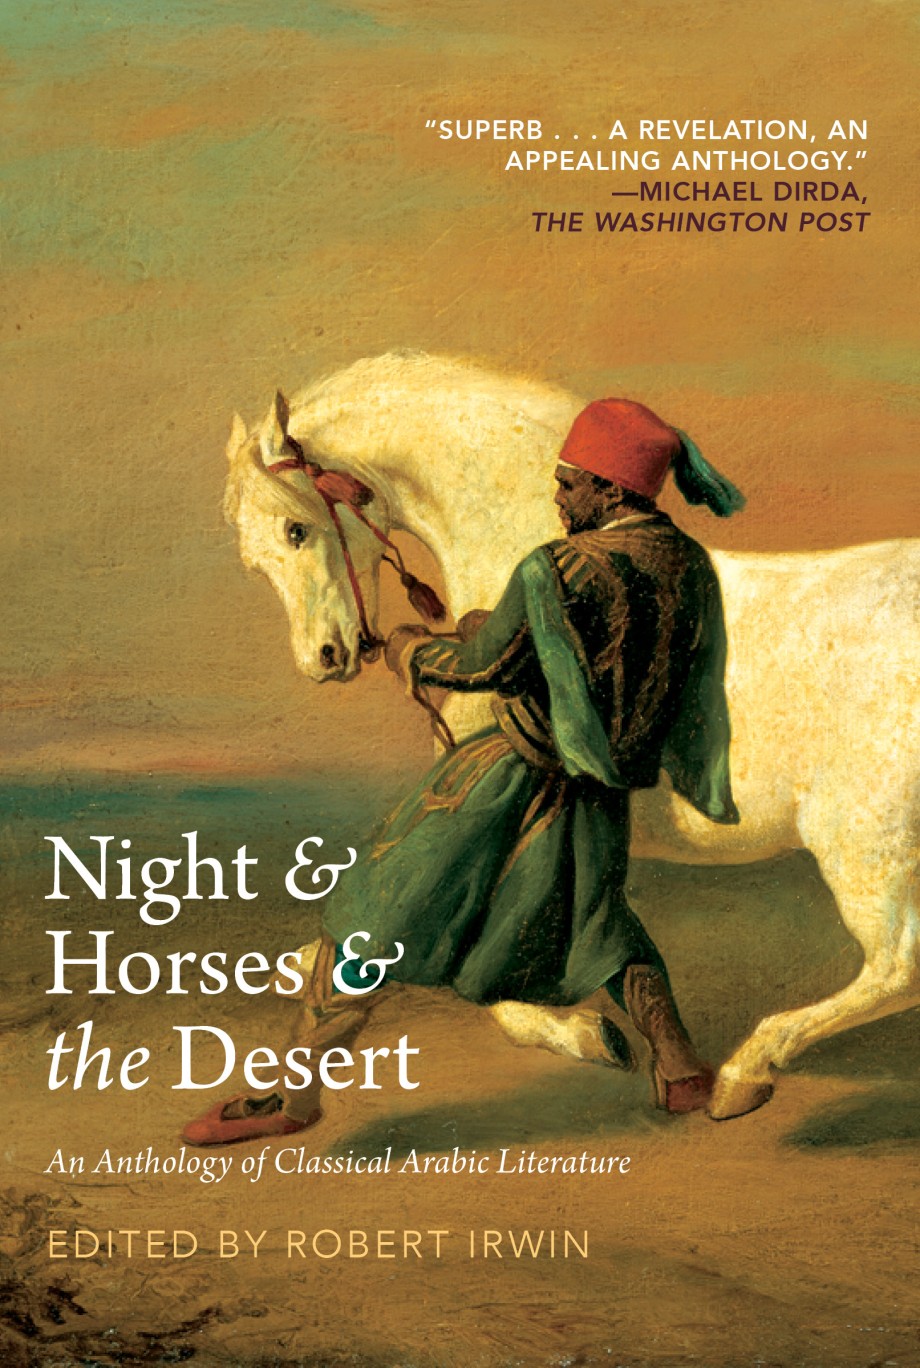 Night & Horses & The Desert An Anthology of Classic Arabic Literature